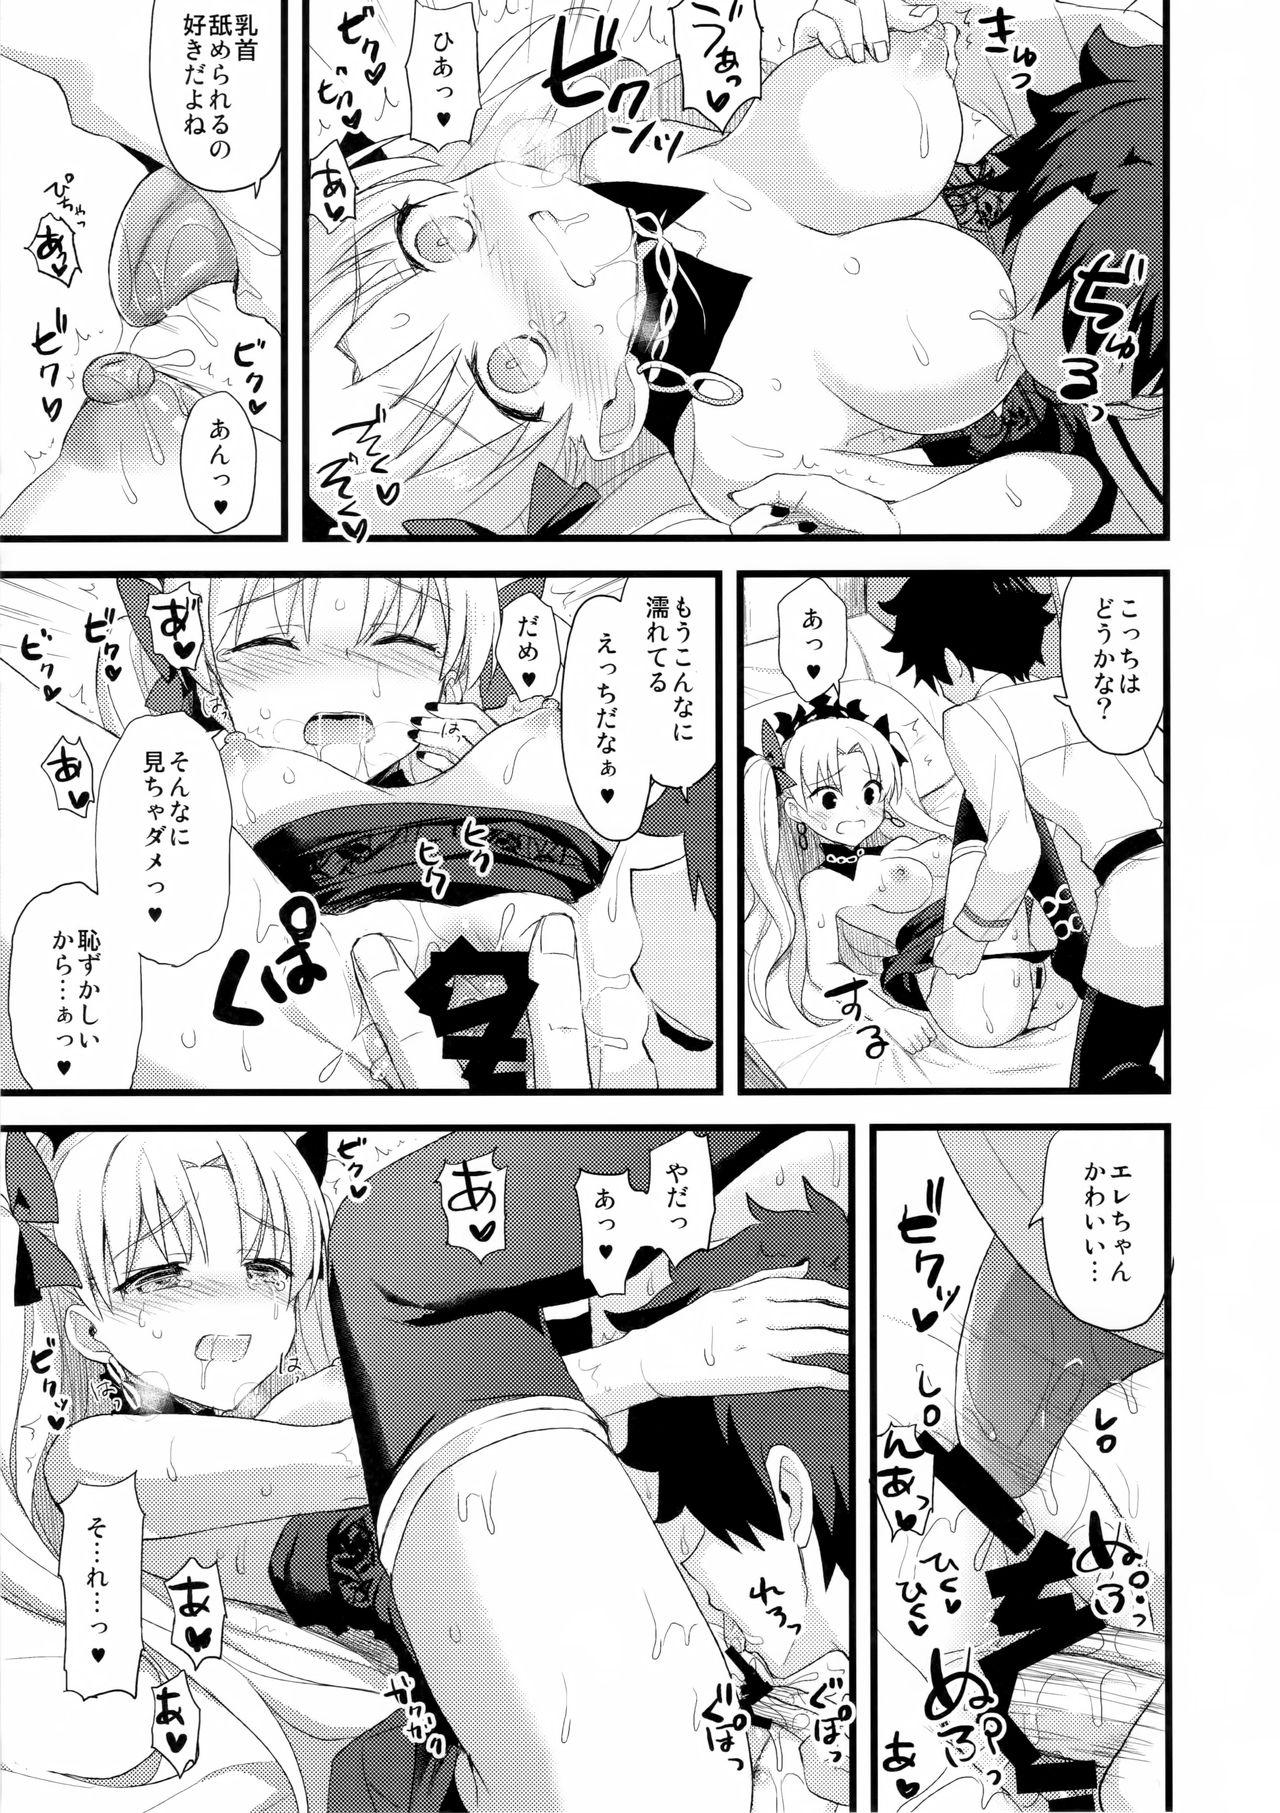 Sloppy Blowjob My Room de Ere-chan to. - Fate grand order Gostosa - Page 12